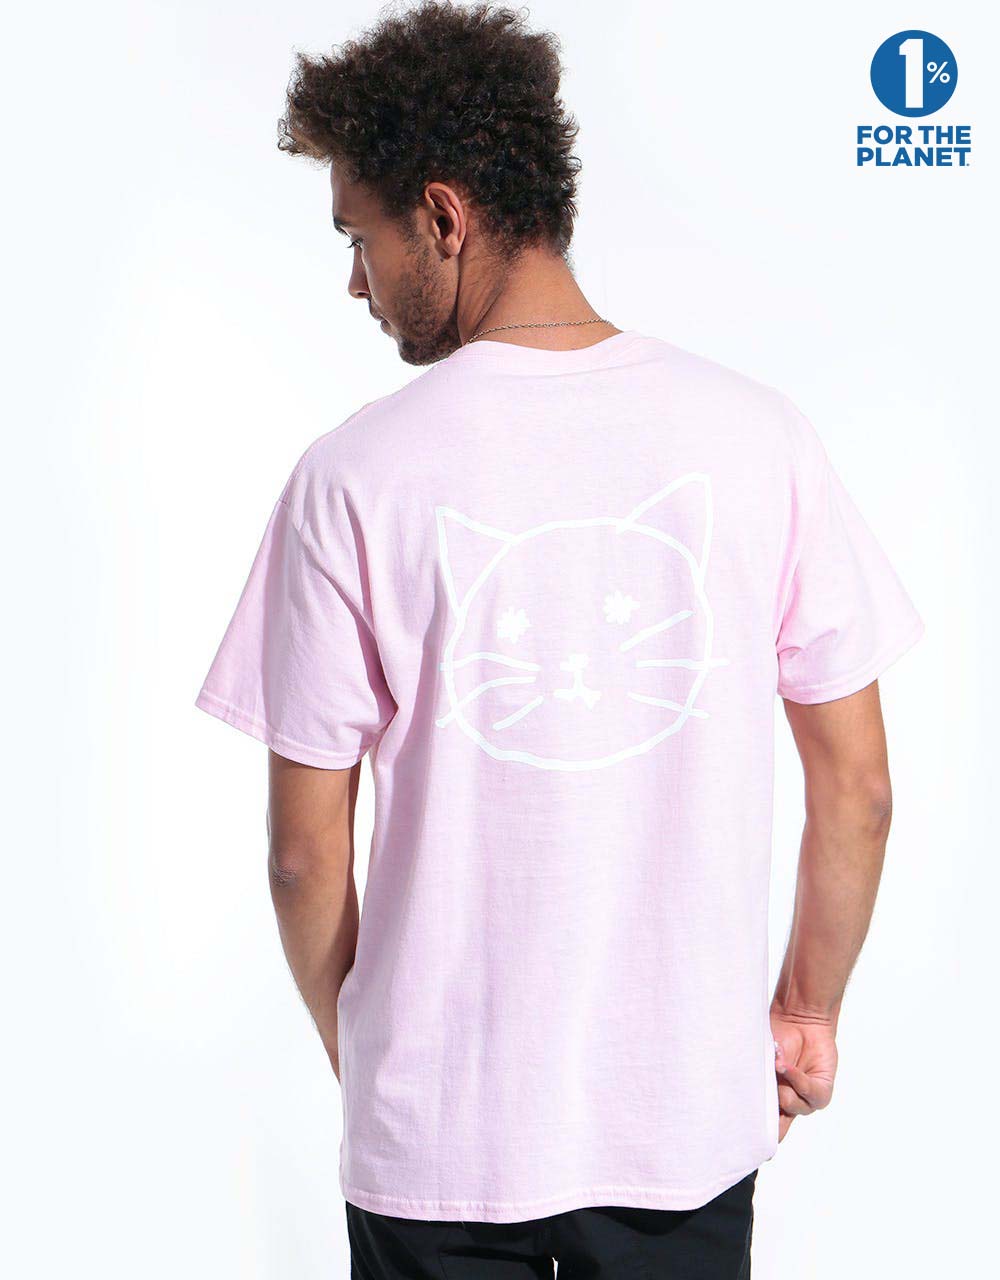 Route One Pussy T-Shirt - Light Pink